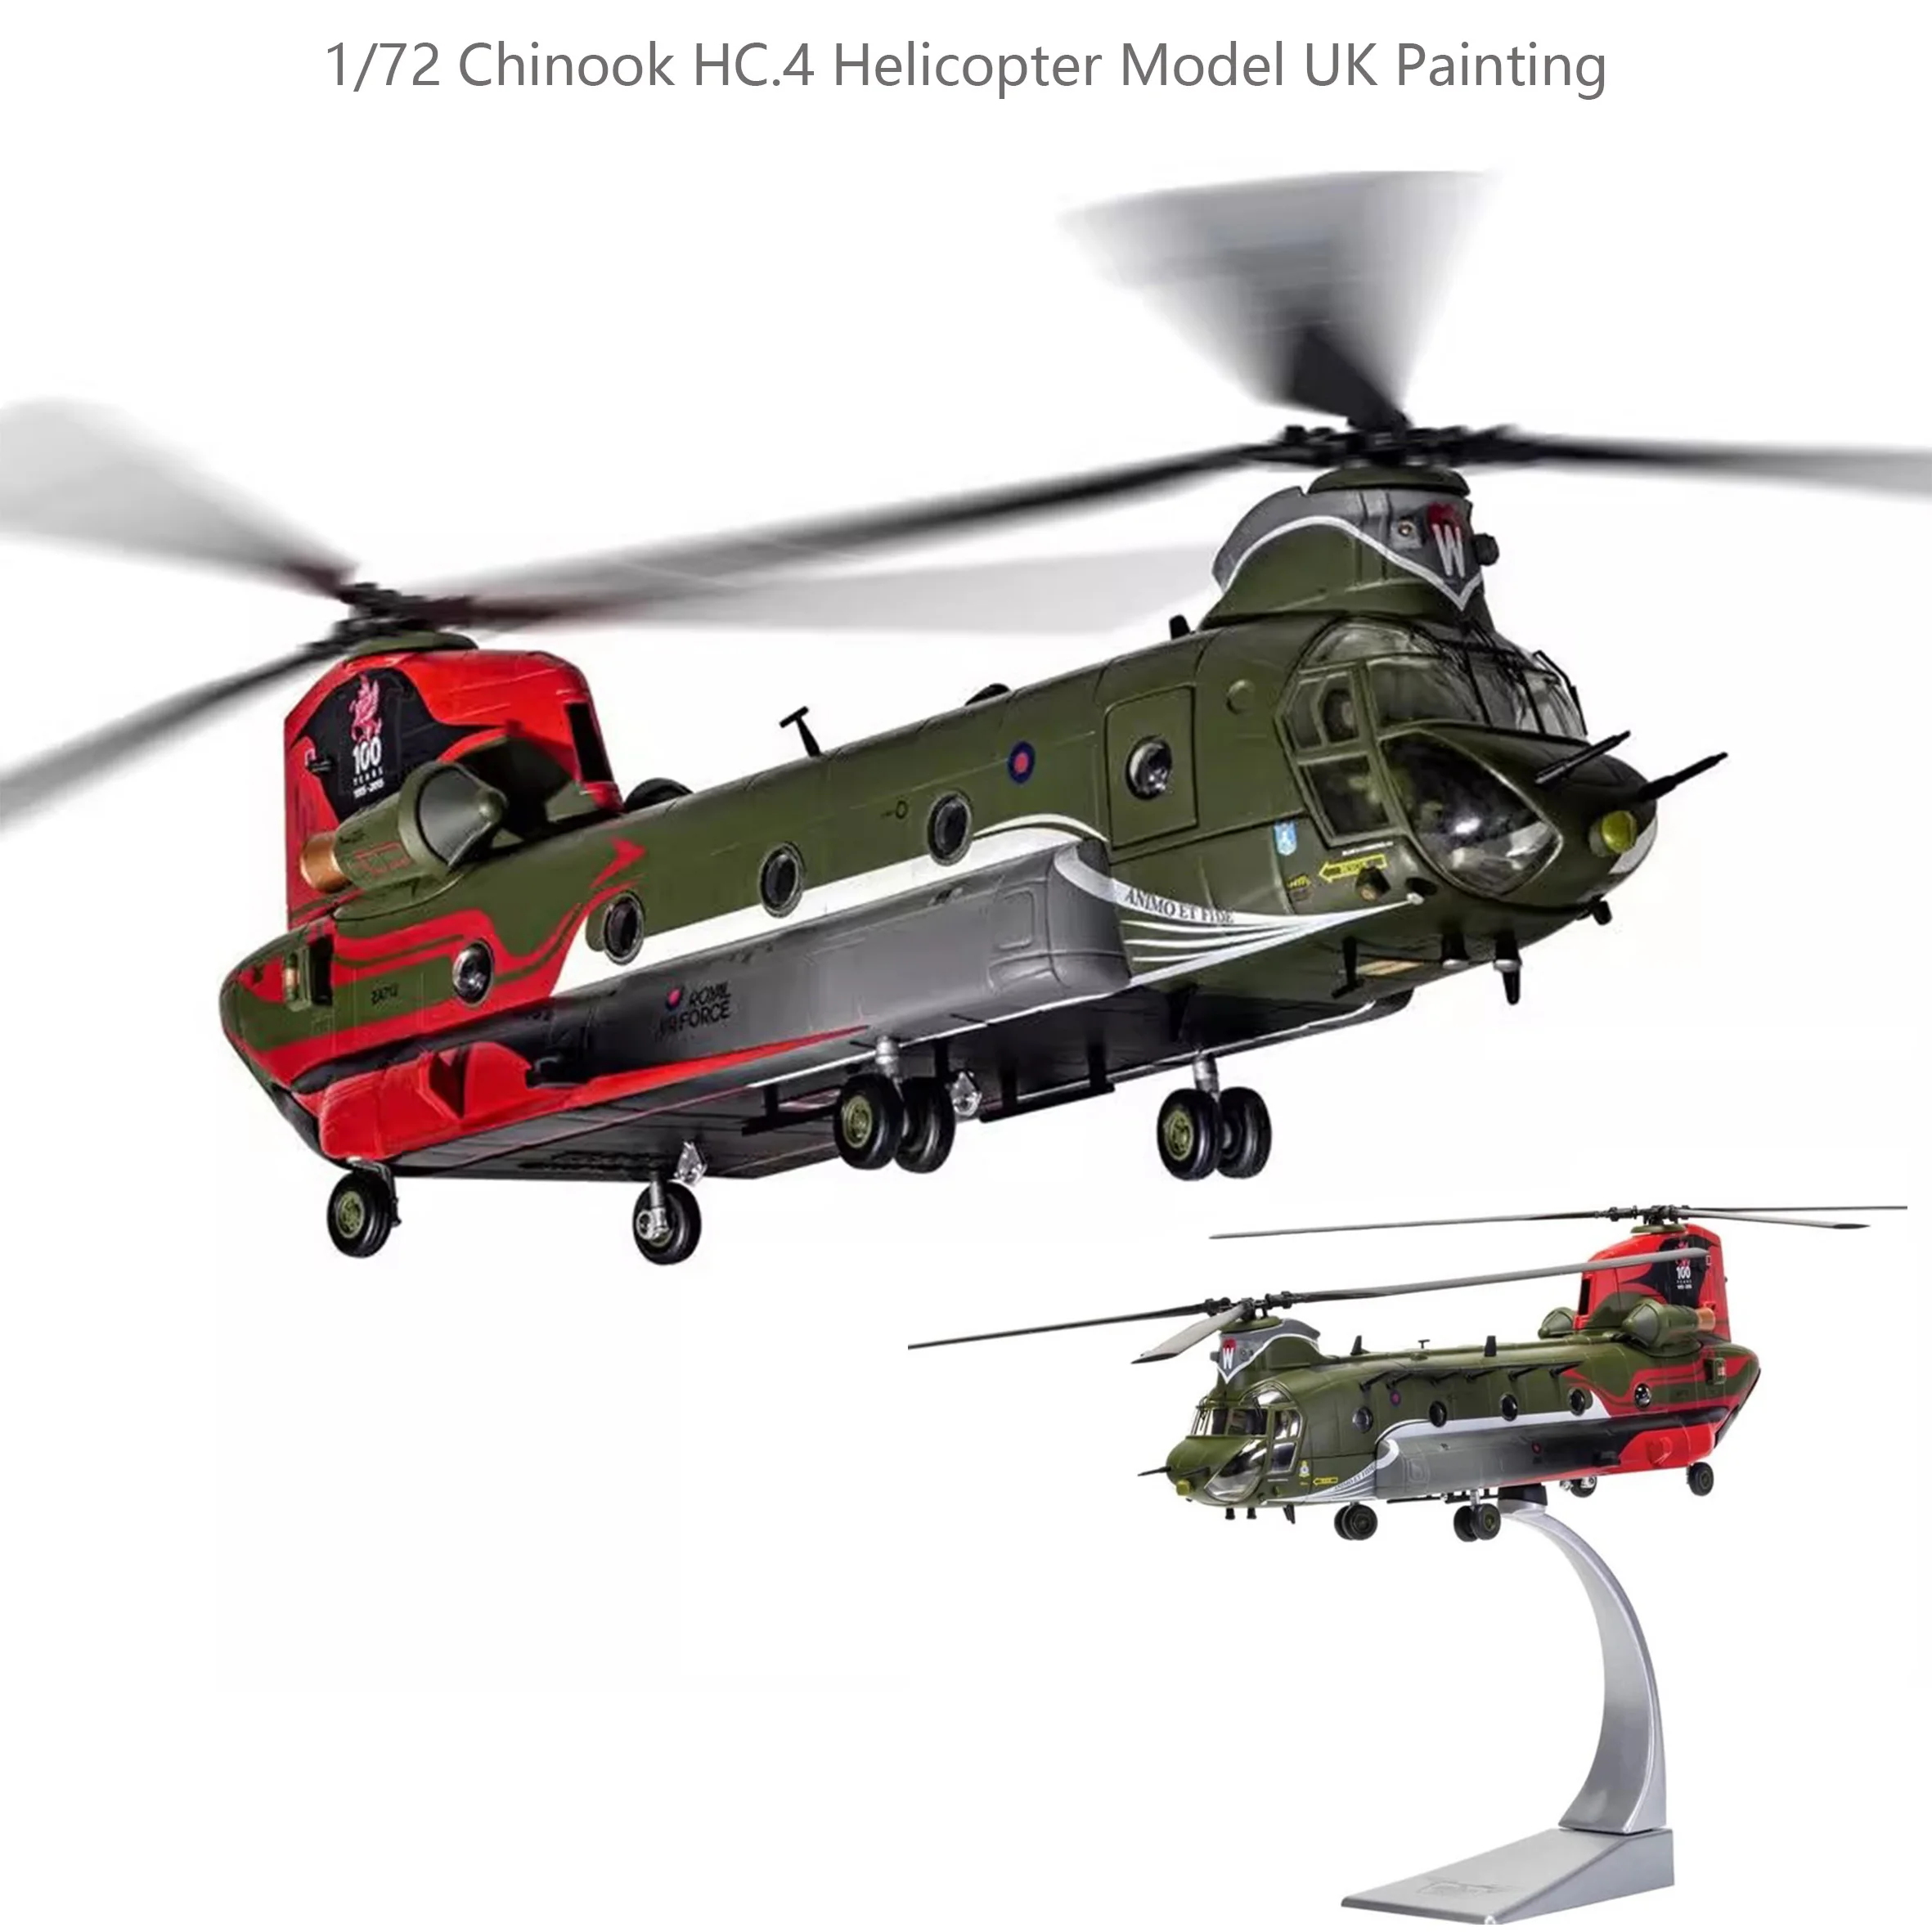 

Fine AA34215 1/72 Chinook HC.4 Helicopter Model UK Painting Alloy finished product collection model